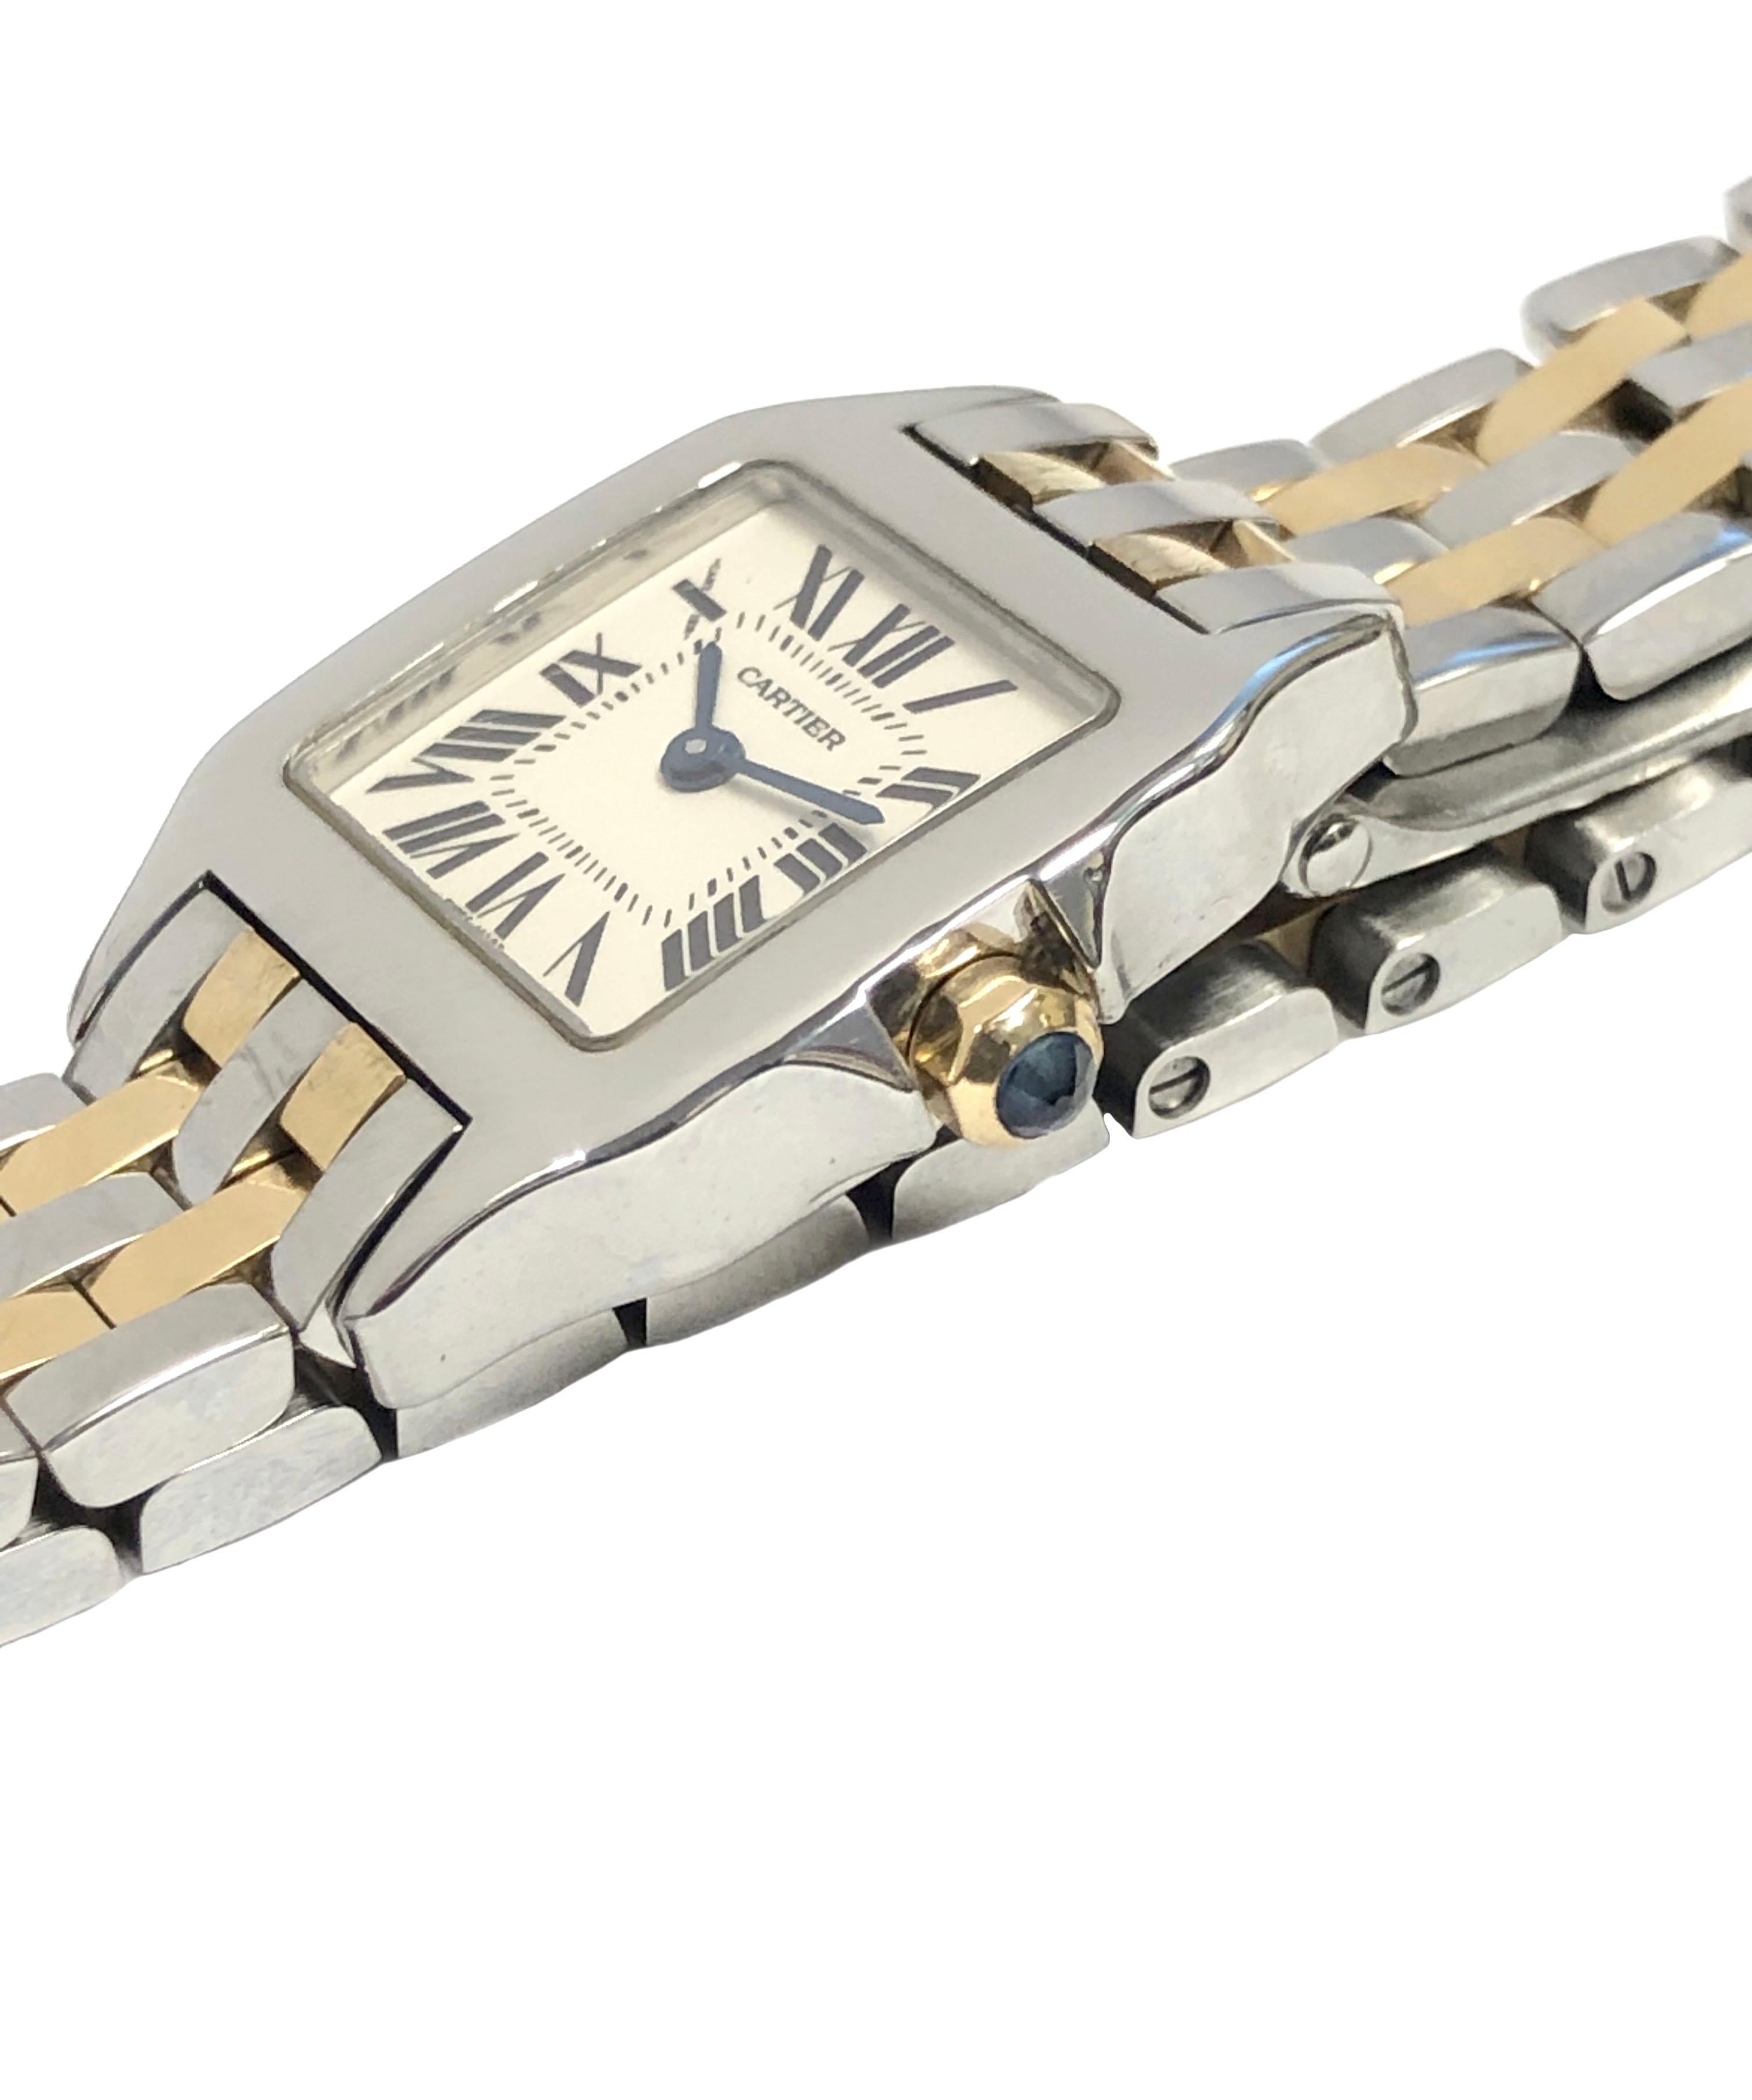 Circa 2017 - 2020 Cartier Santos Demoiselle collection Ladies Wrist Watch, 27 X 20 M.M. Stainless Steel 2 piece water resistant case with Sapphire set Gold crown. Quartz movement, White dial with Black Roman numerals. Stainless Steel and 18K Yellow